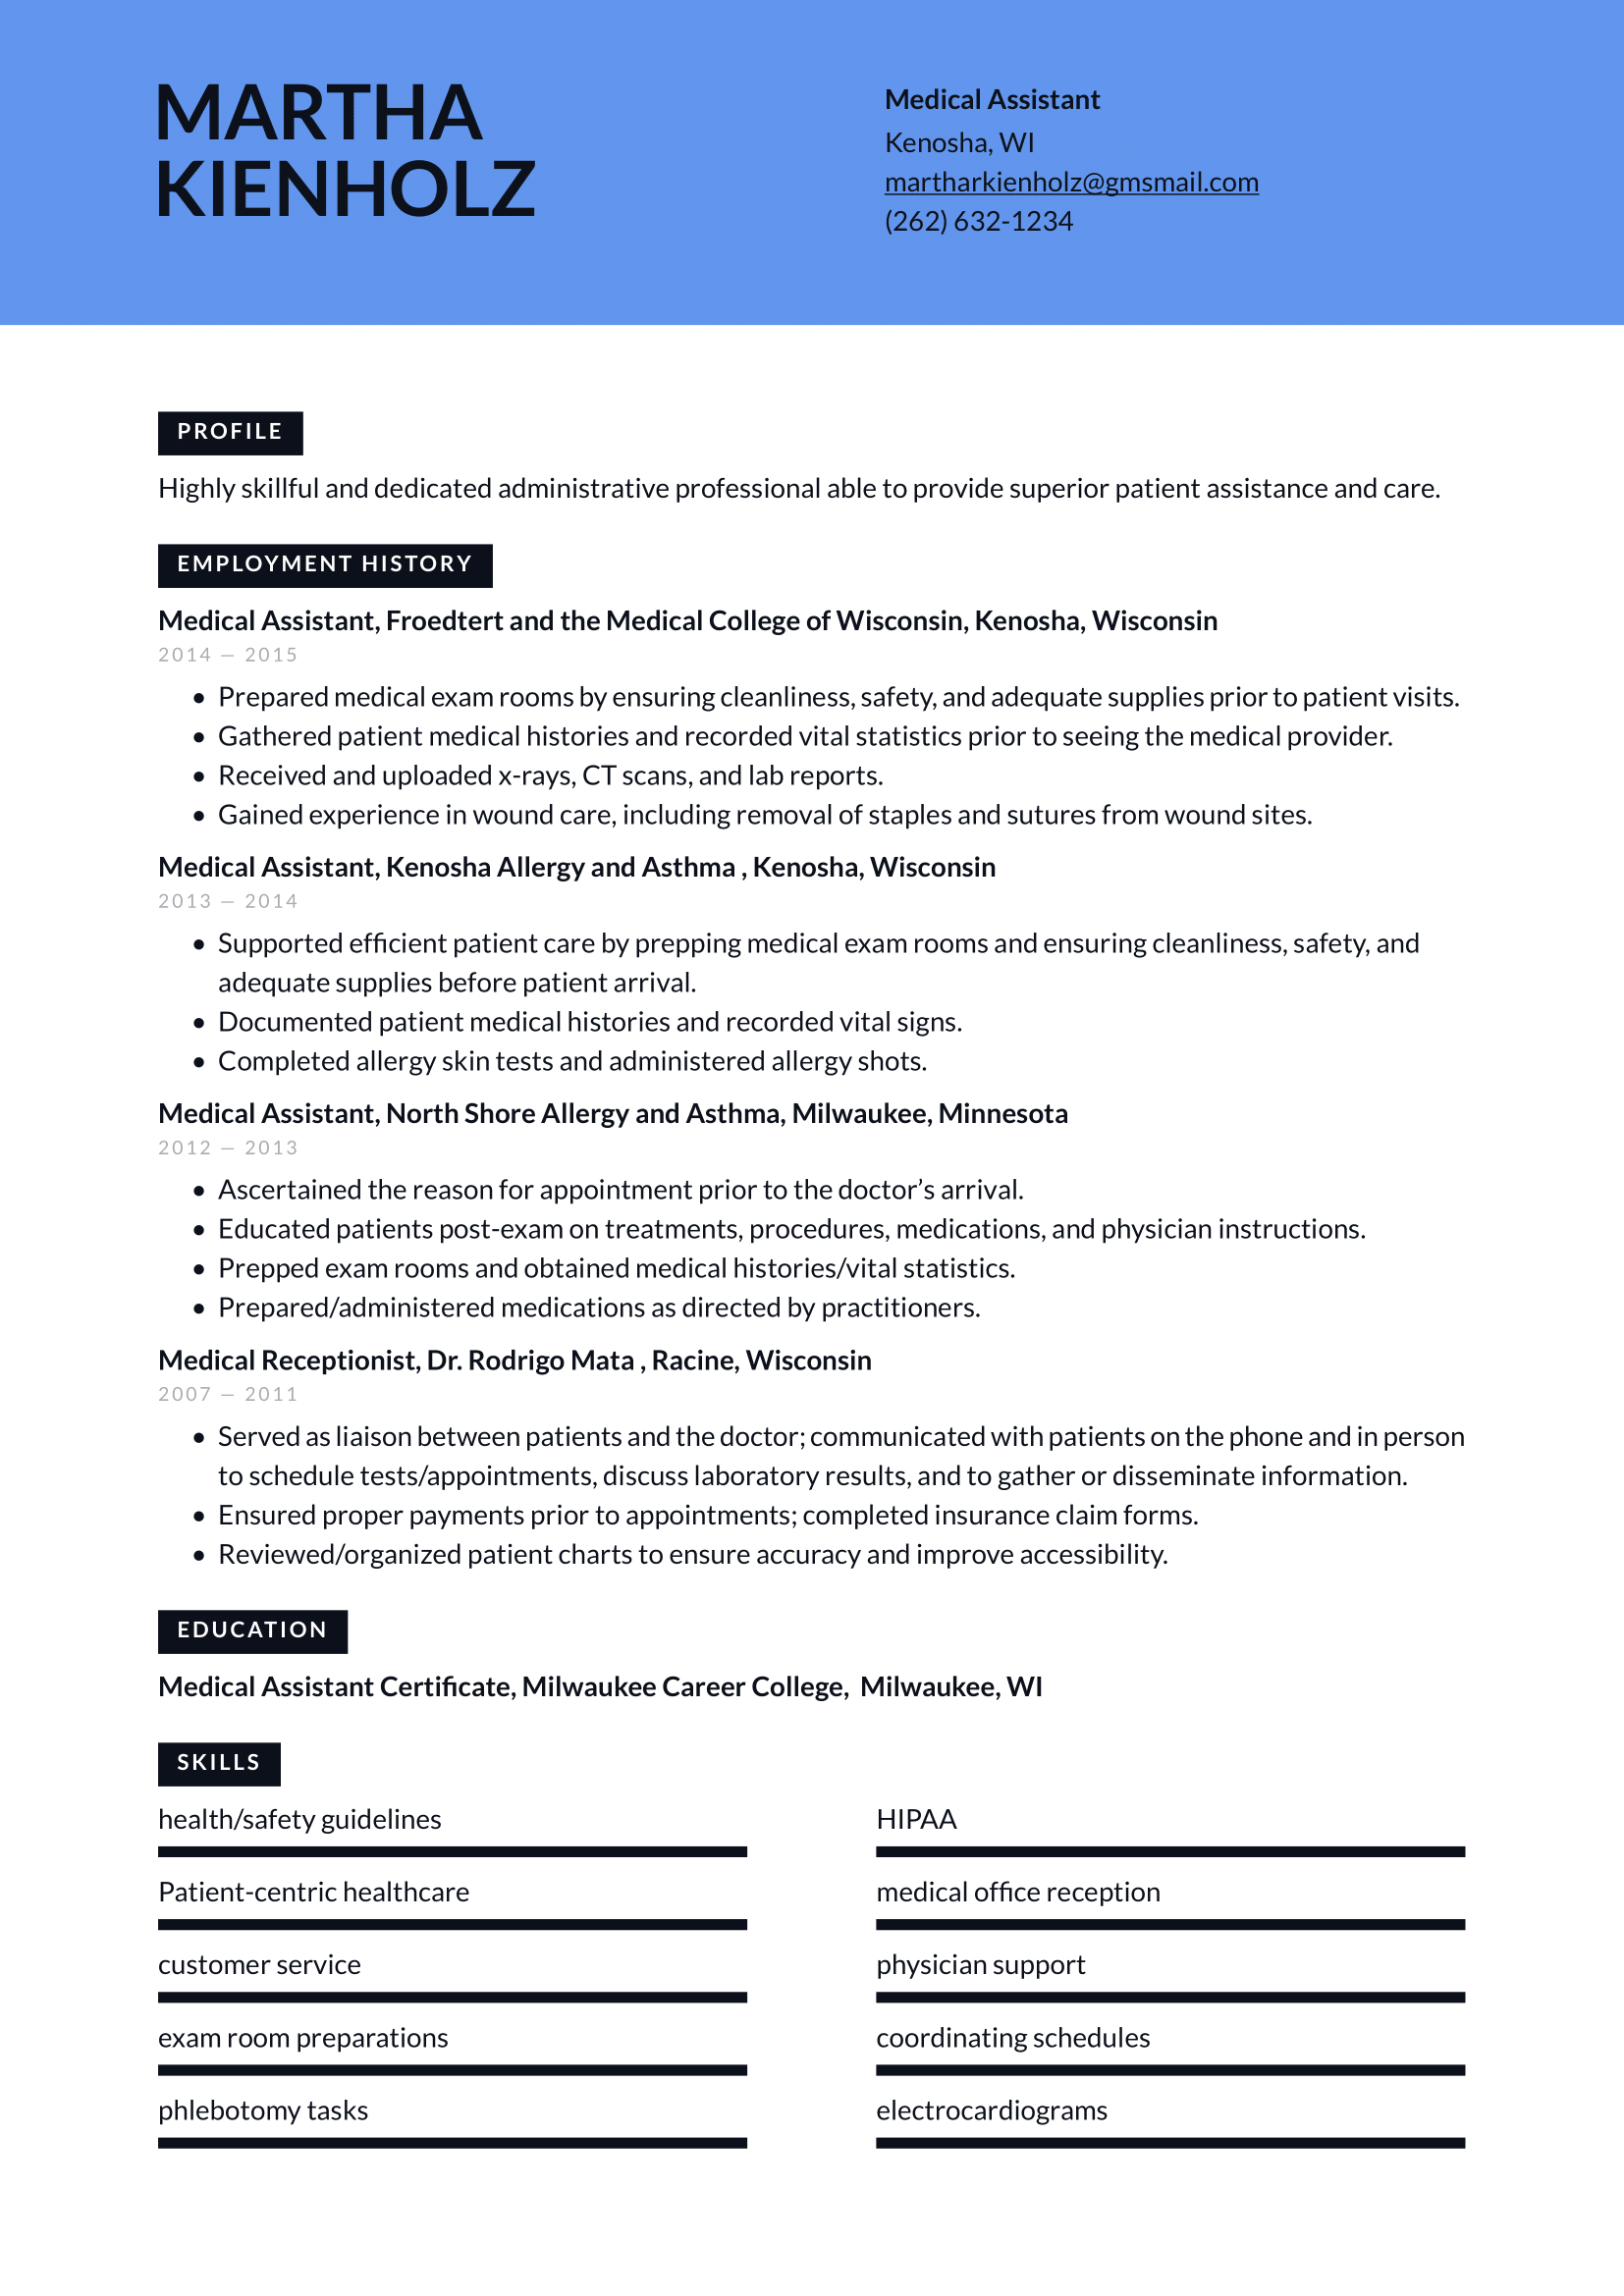 Medical_Assistant-Resume-Example.png